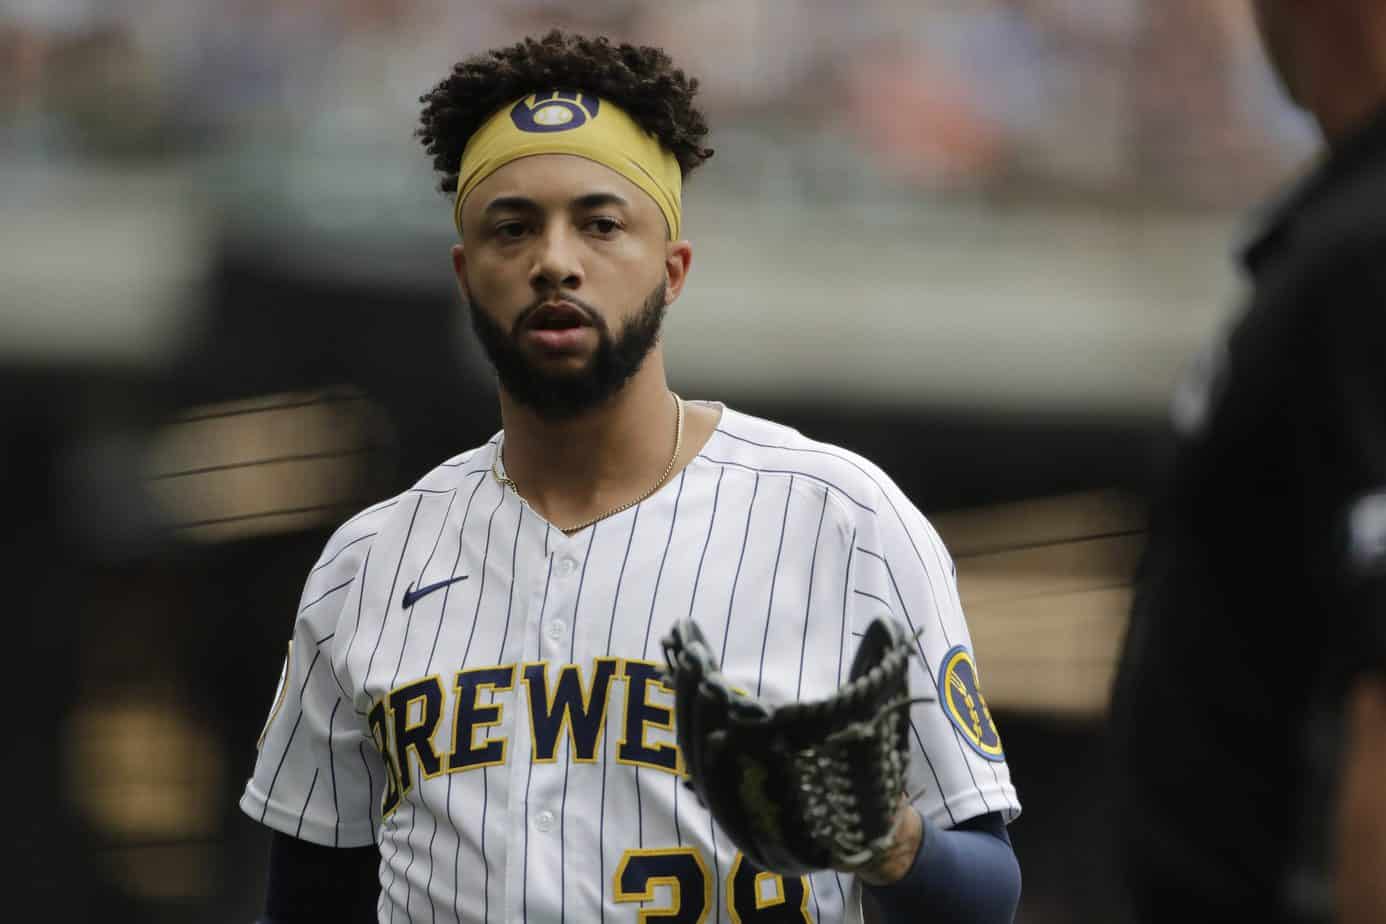 Milwaukee Brewers reliever Devin Williams took the bulk of the blame for the Brewers being eliminated due to him punching a wall before the NLDS